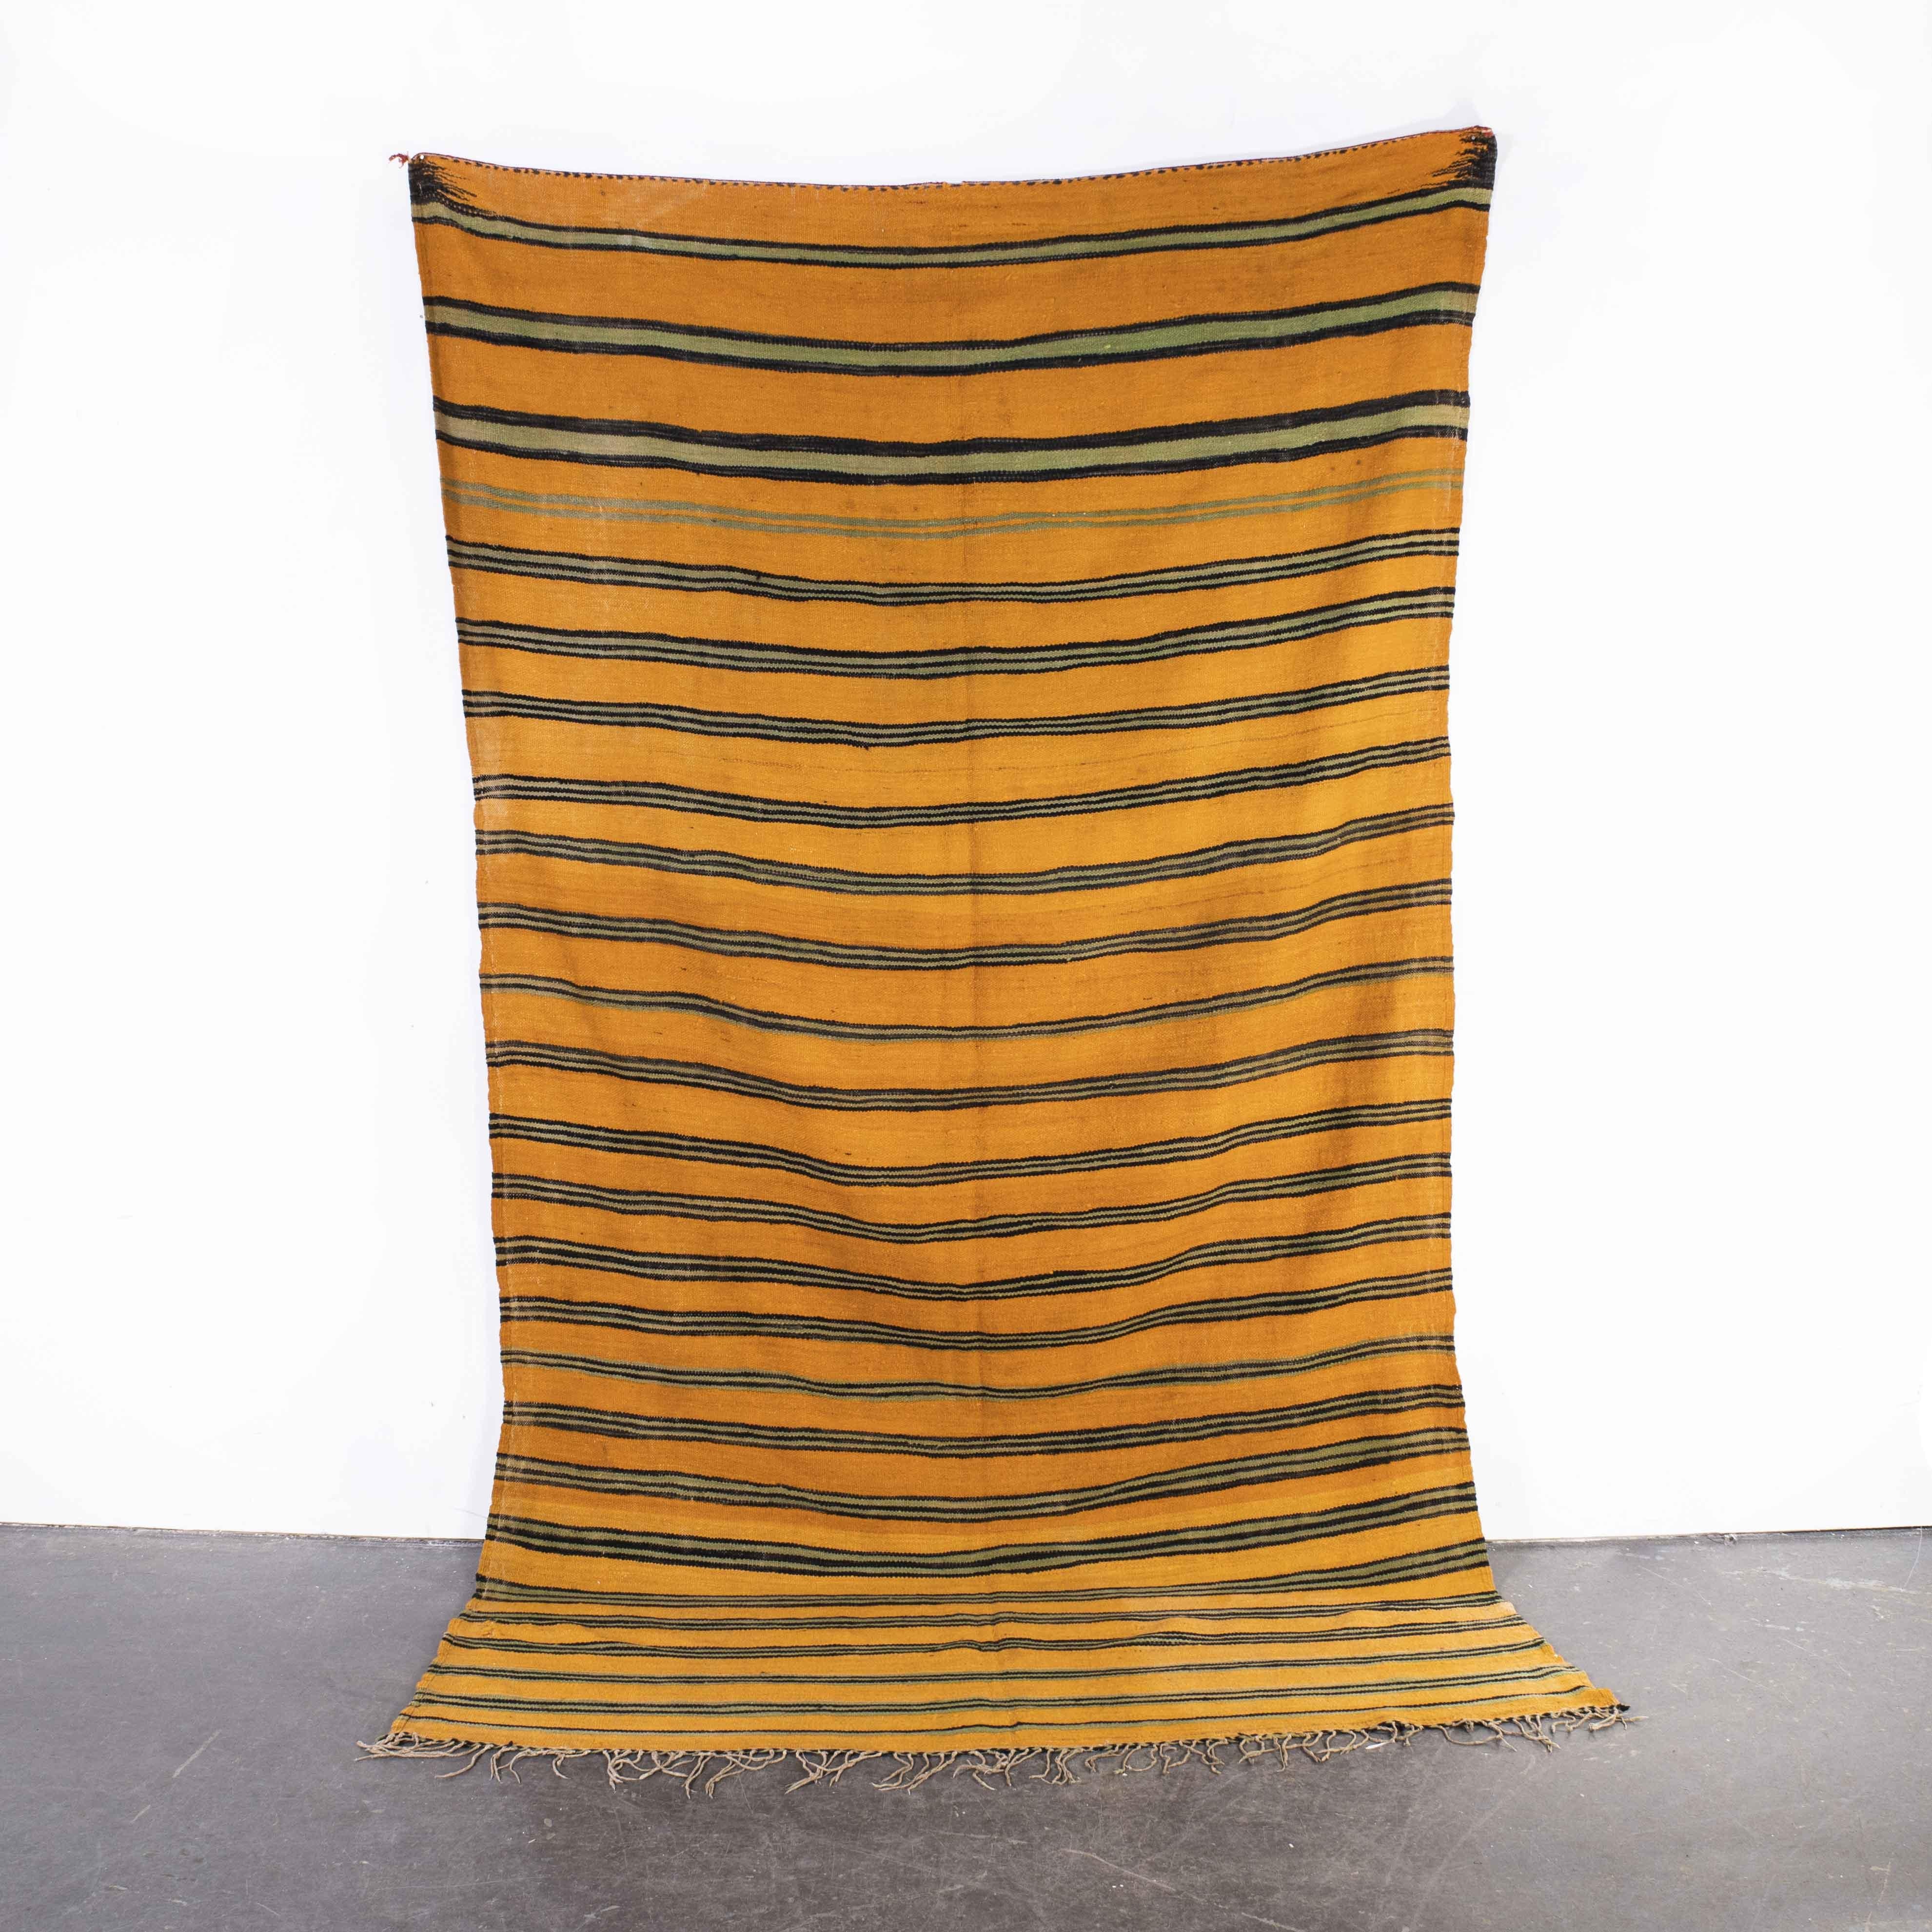 Vintage Berber Orange Stripe Hanbel Rug
Vintage Berber Orange Stripe Hanbel Rug. These are flat-woven rugs (Hanbel in Arabic) which are light in weight due to the lack of pile. They are often used on floors in hotter countries as they are easy to